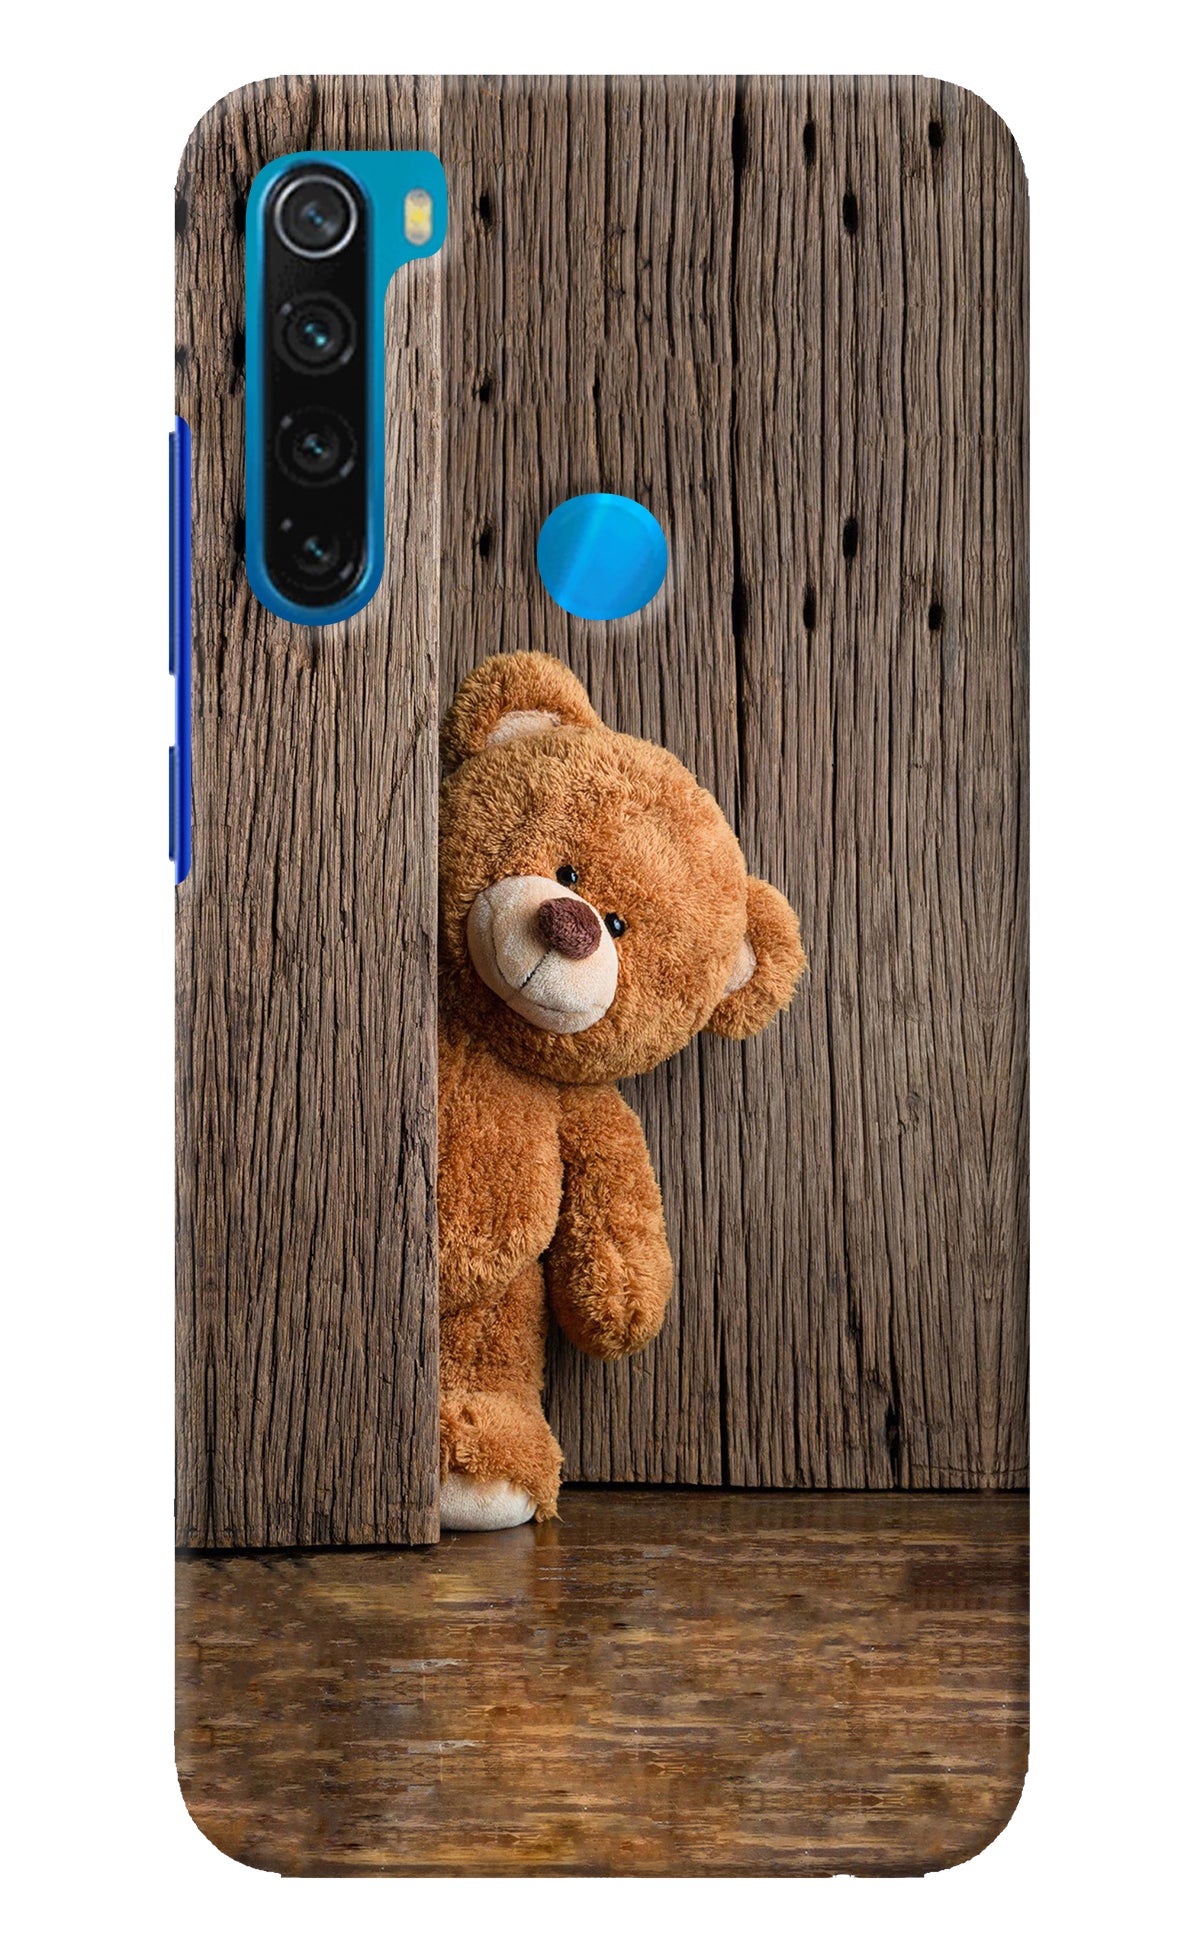 Teddy Wooden Redmi Note 8 Back Cover